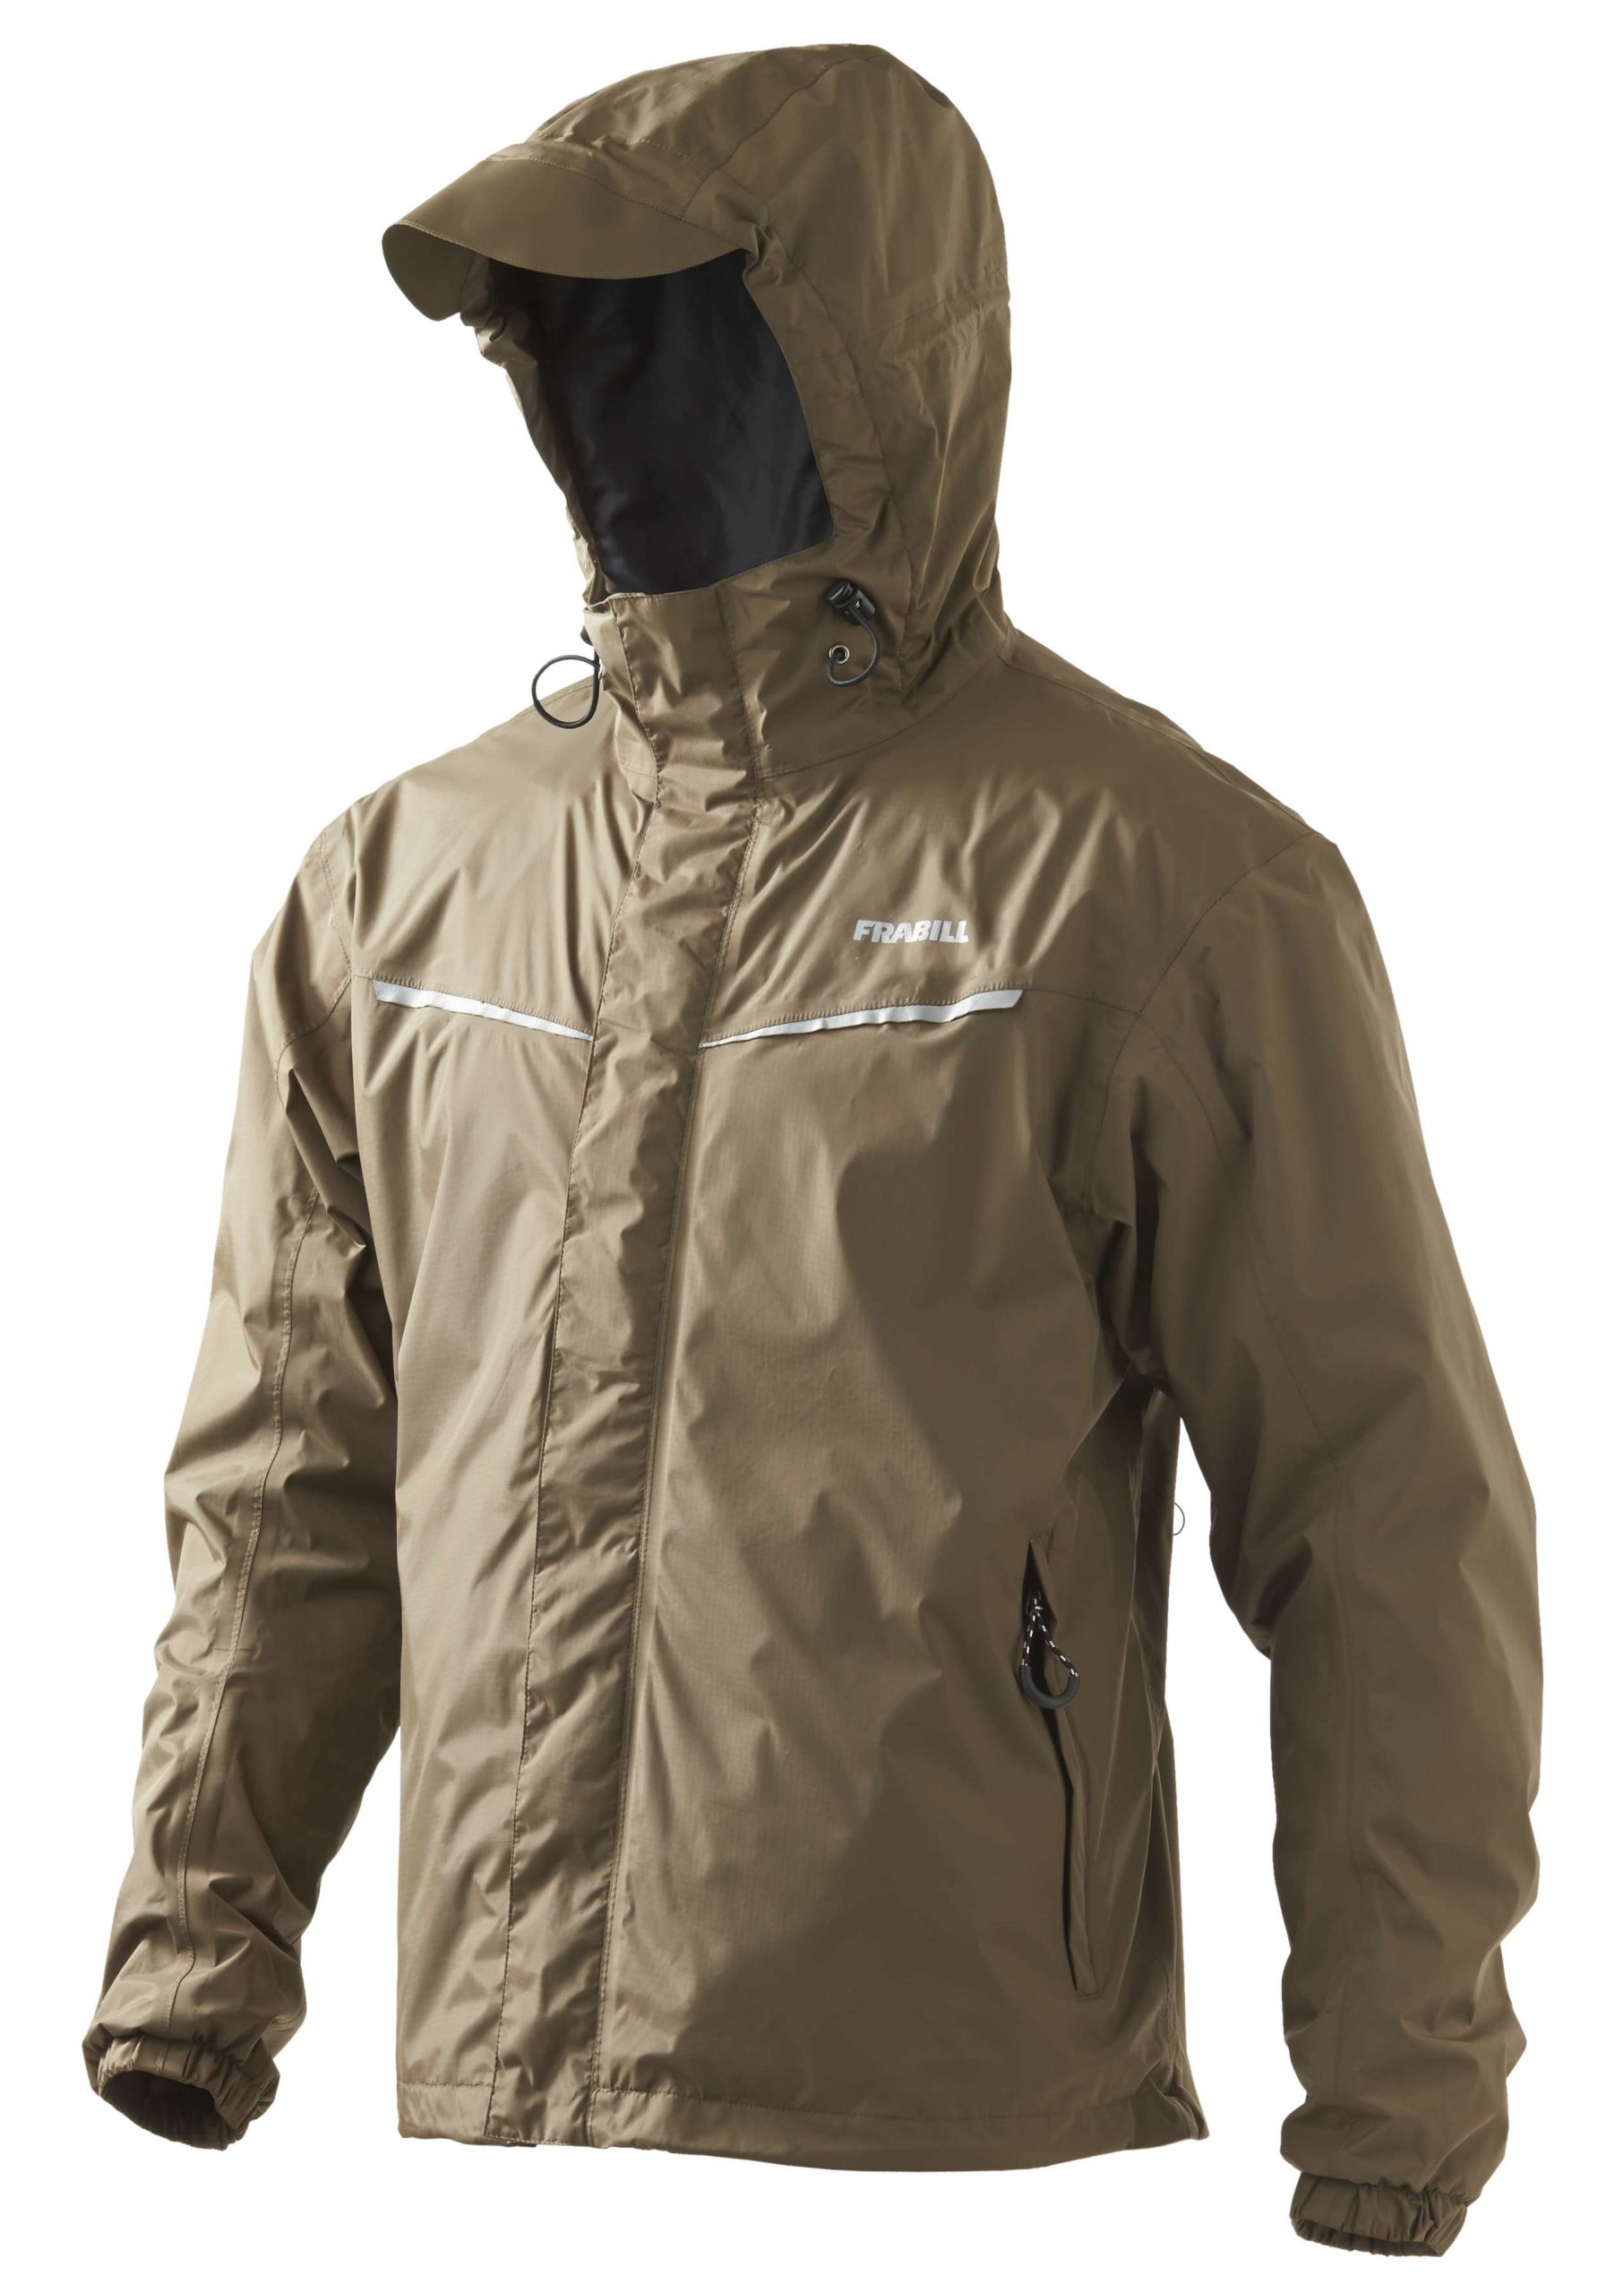 <b>Frabill</b><br>	Stow Series Jacket<br>				A two layer waterproof, windproof, breathable light weight rip-stop shell series of jackets that are 100 percent seam sealed. The two-way adjustable, waterproof hood has a reinforced brin/sun visor, and the large pockets have zipper closure and storm flaps. Packable in a stow pocket.